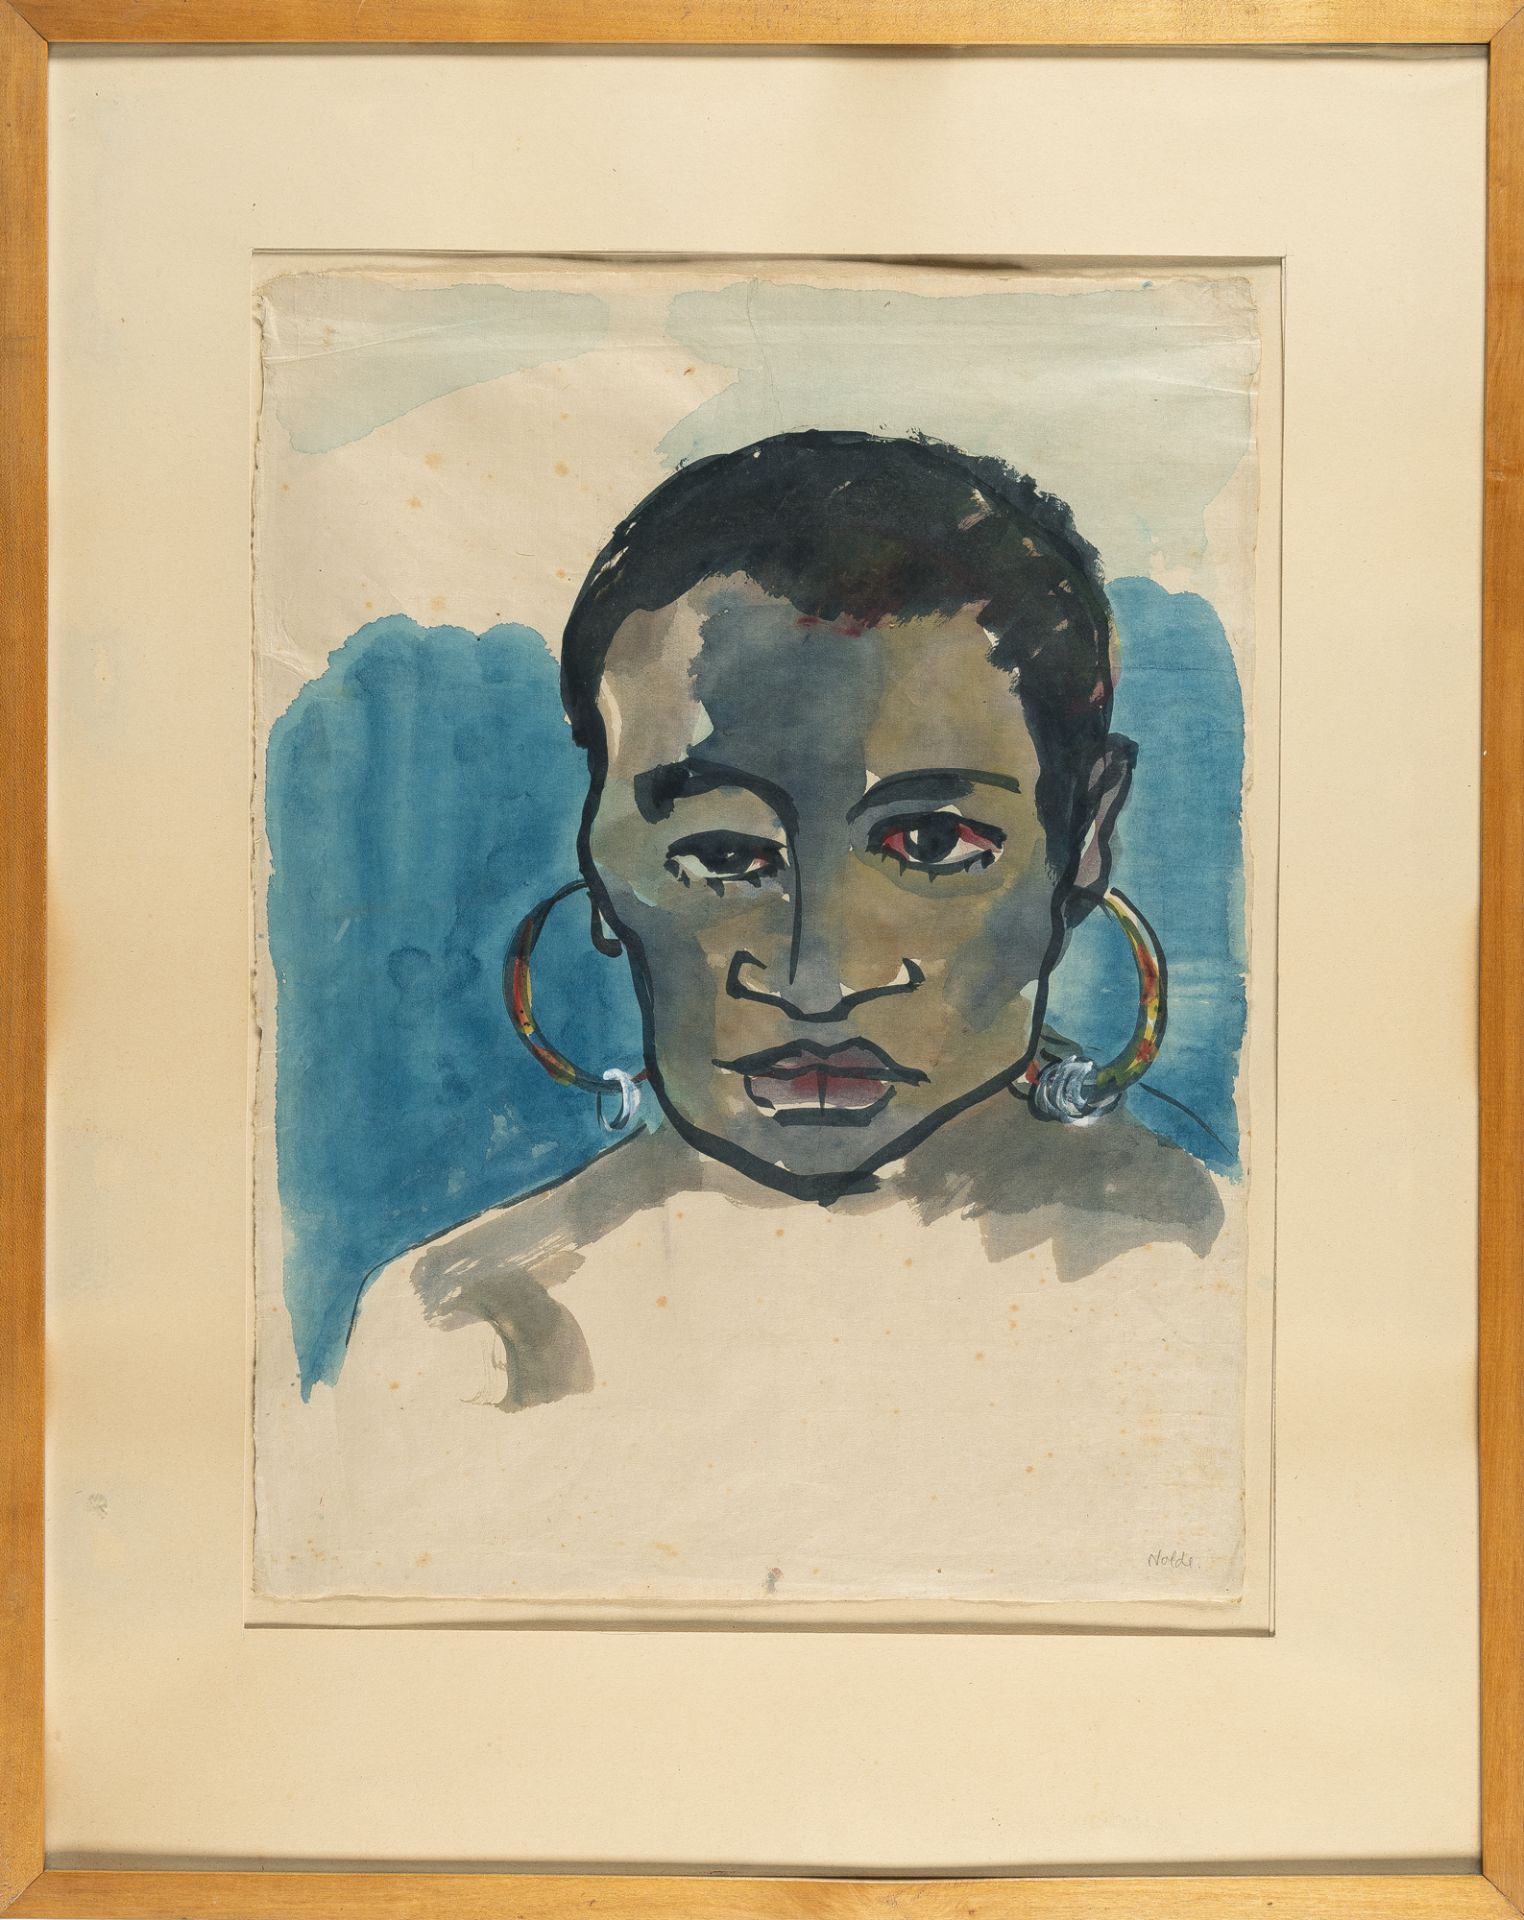 Emil Nolde (1867 Nolde - Seebüll 1956), “Papua woman”Watercolour and Indian ink on Japanese laid - Image 4 of 4